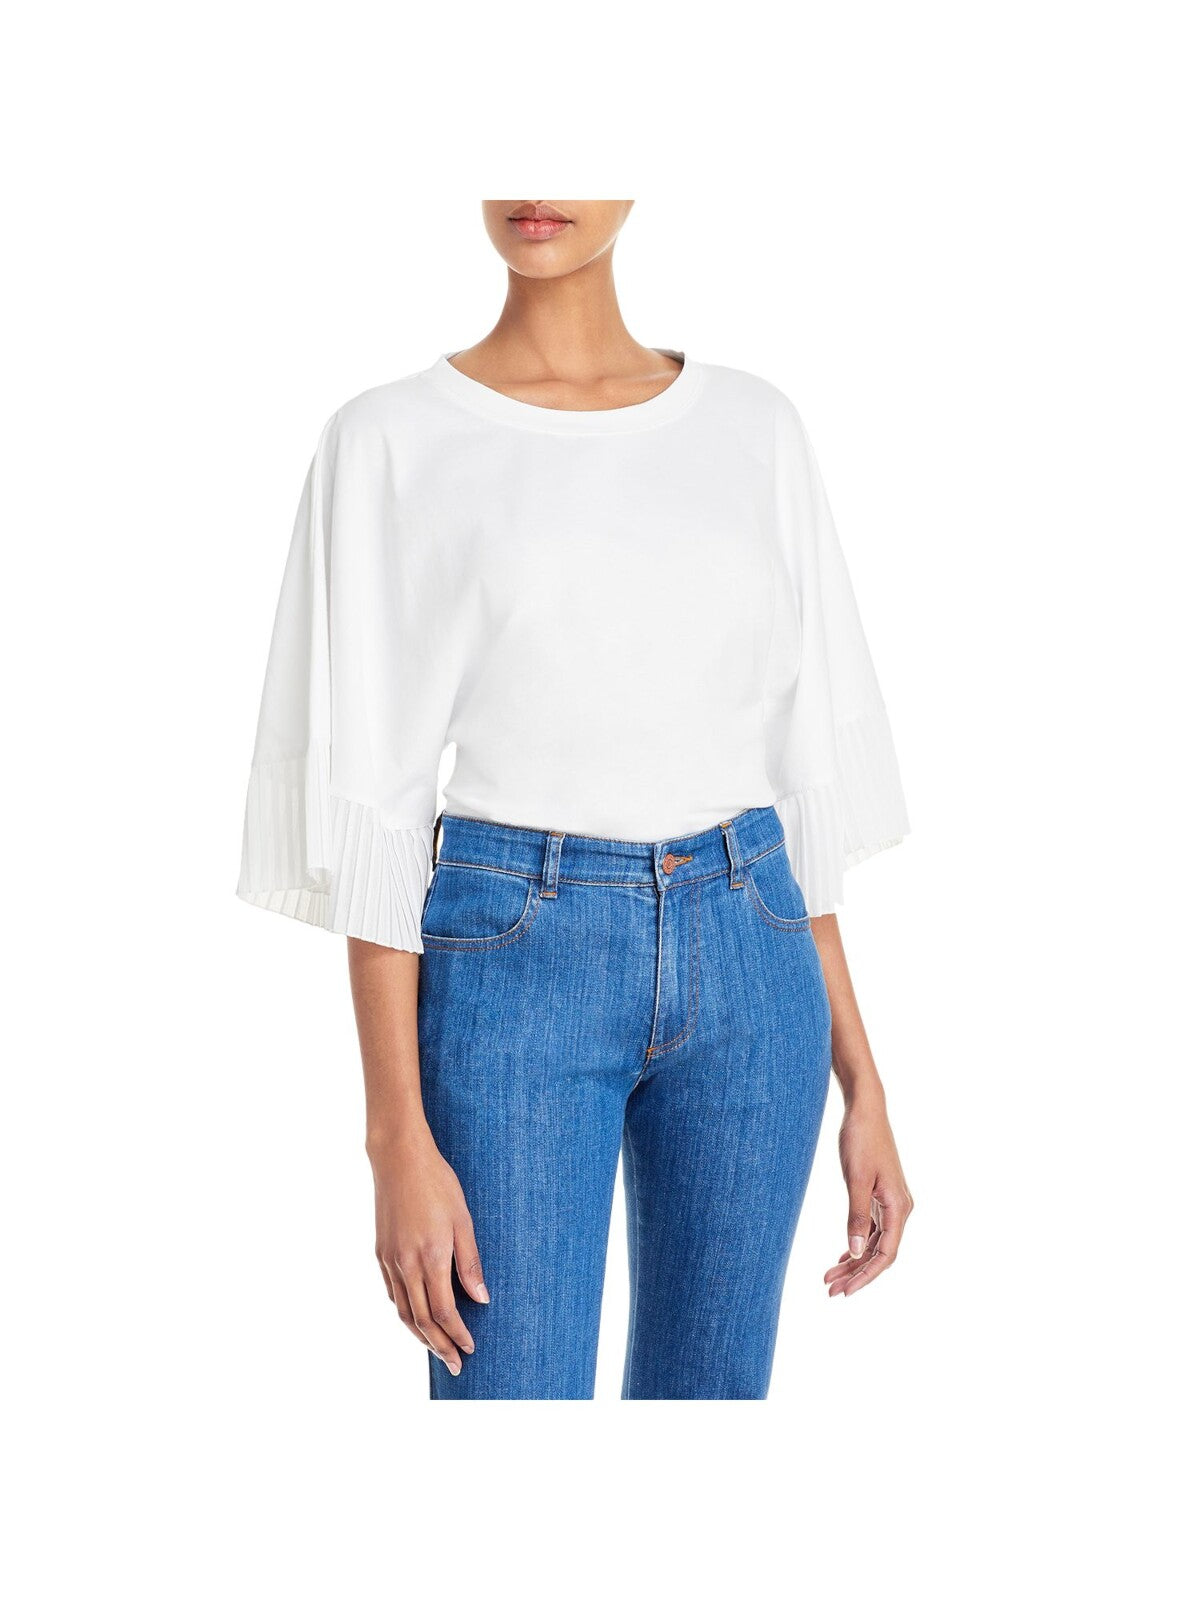 SEE BY CHLOE Womens White Bell Sleeve Round Neck Top M